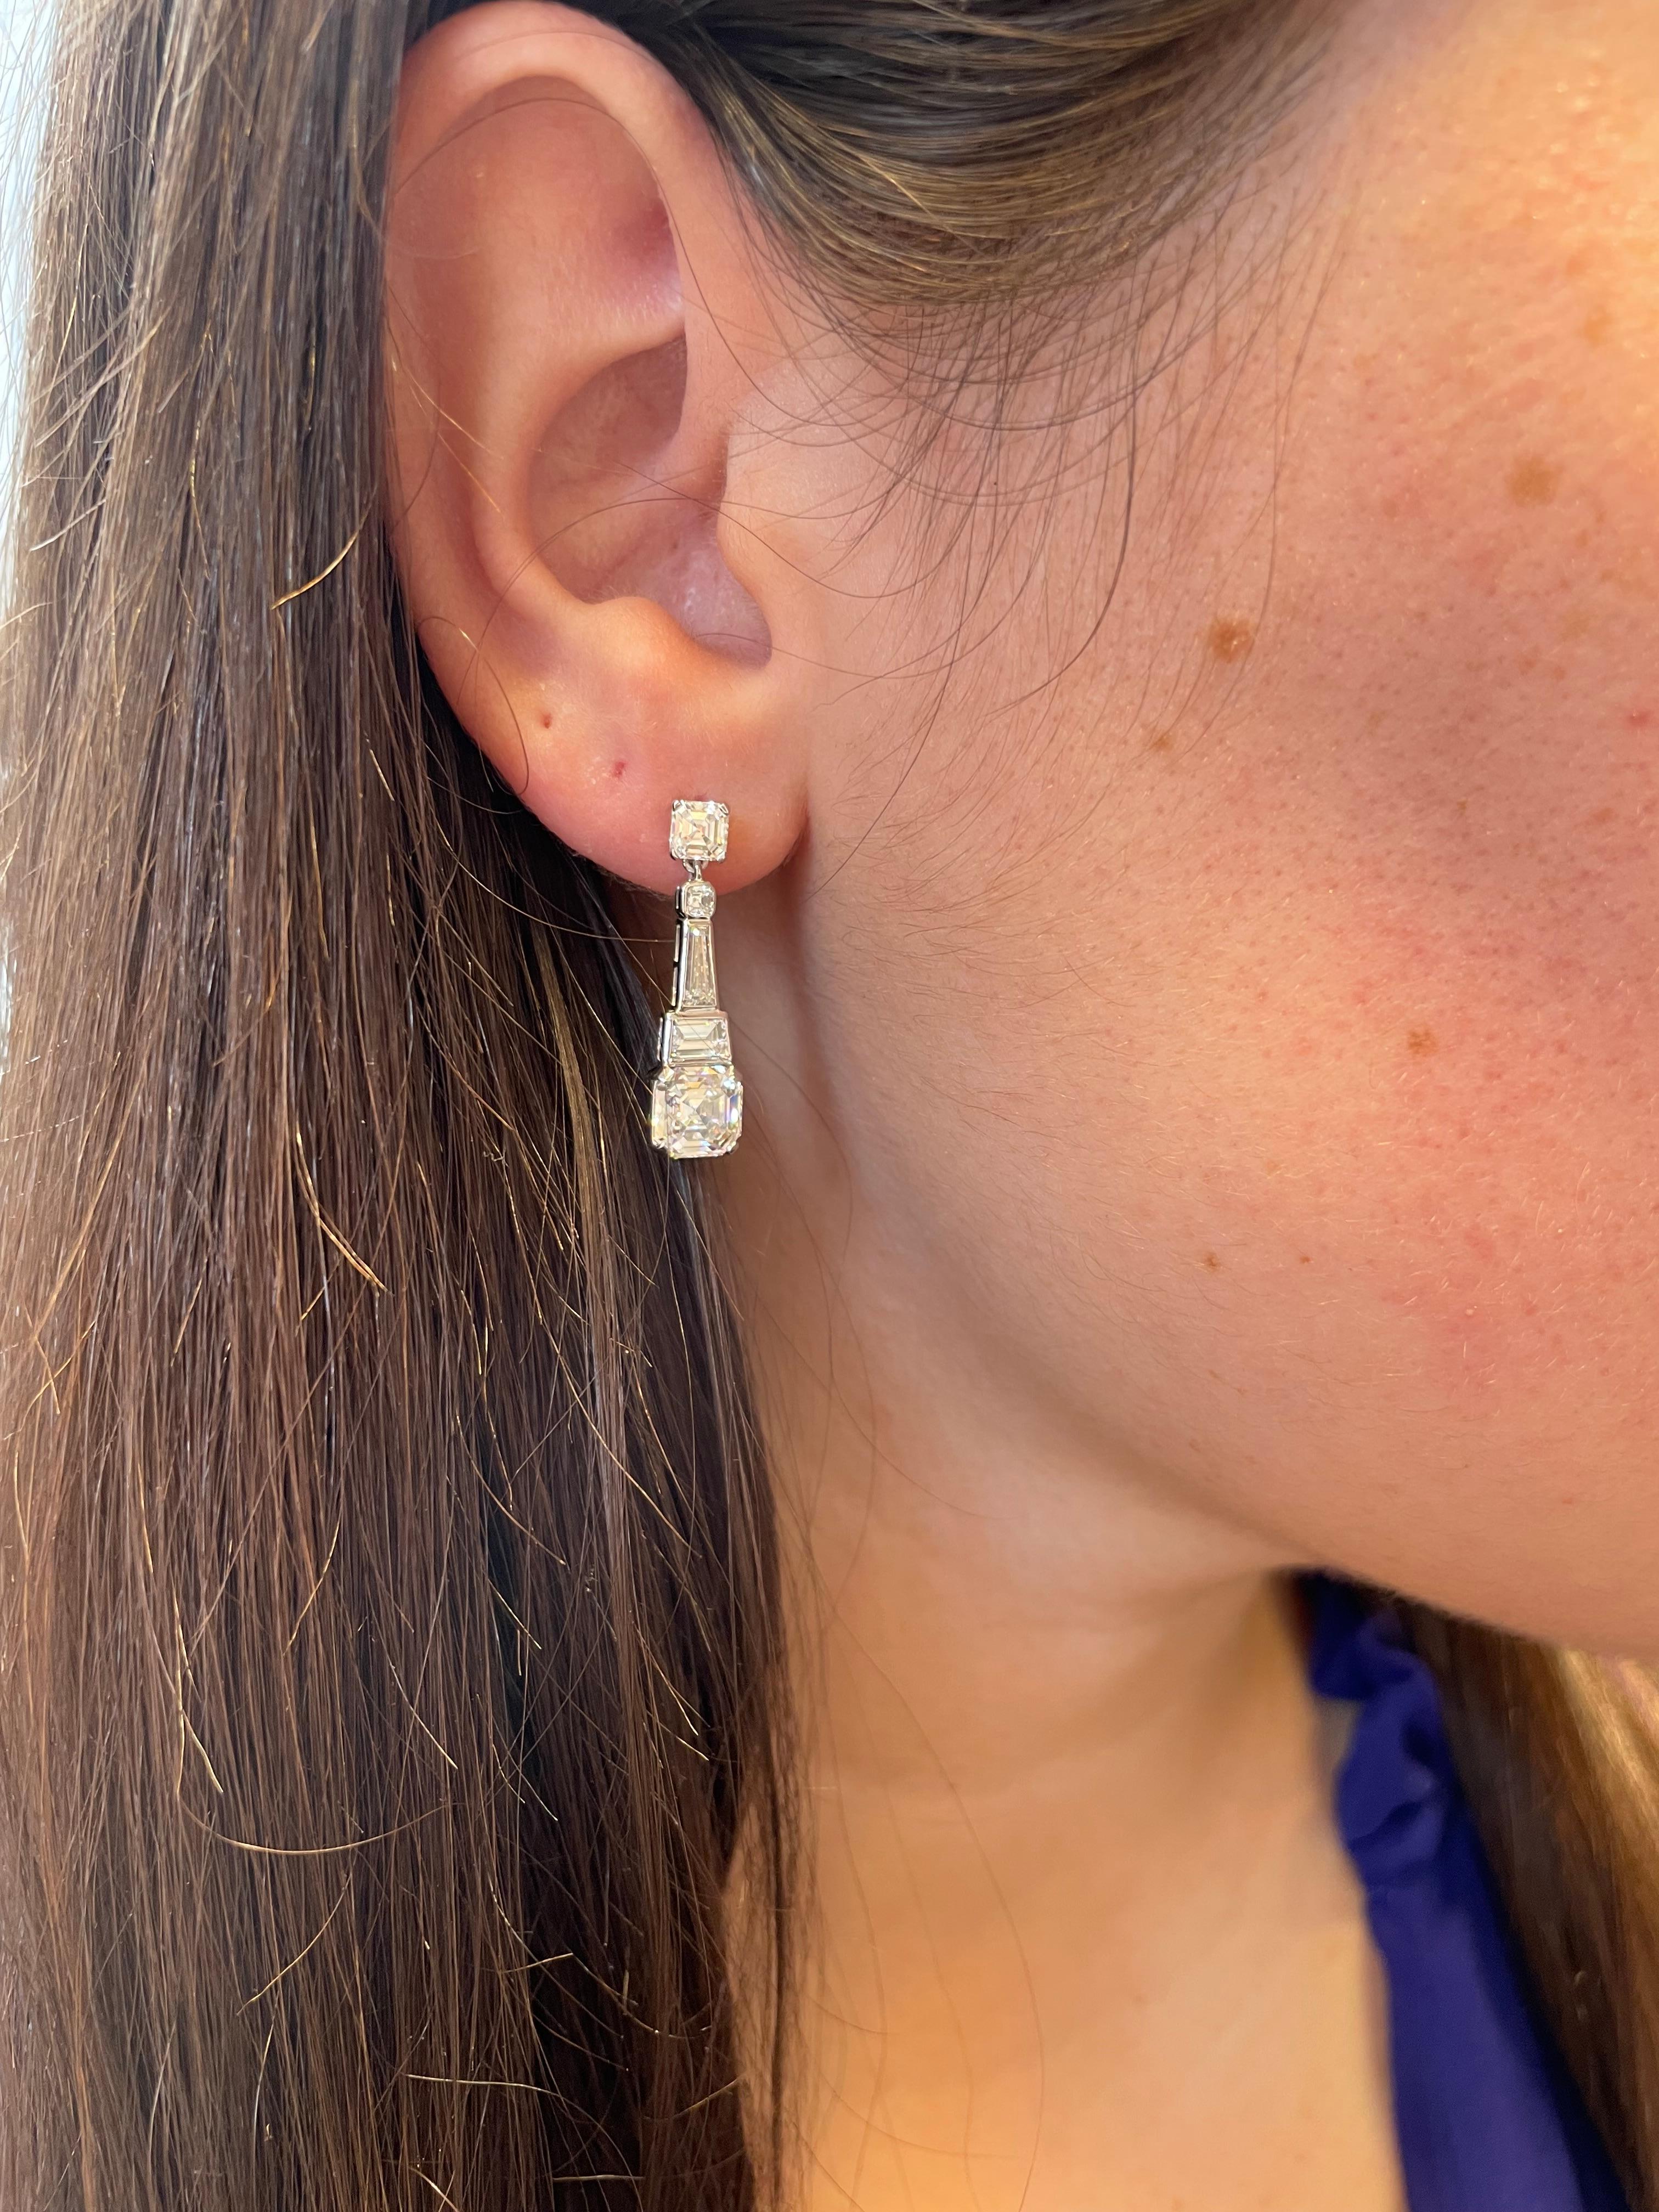 These elegant earrings by J. Birnbach are a stunning celebration of the Art Deco aesthetic. The earrings contain Asscher cuts, tapered baguettes, and step cut trapezoid diamonds. The combination of a variety of step cut diamonds creates a sleek and